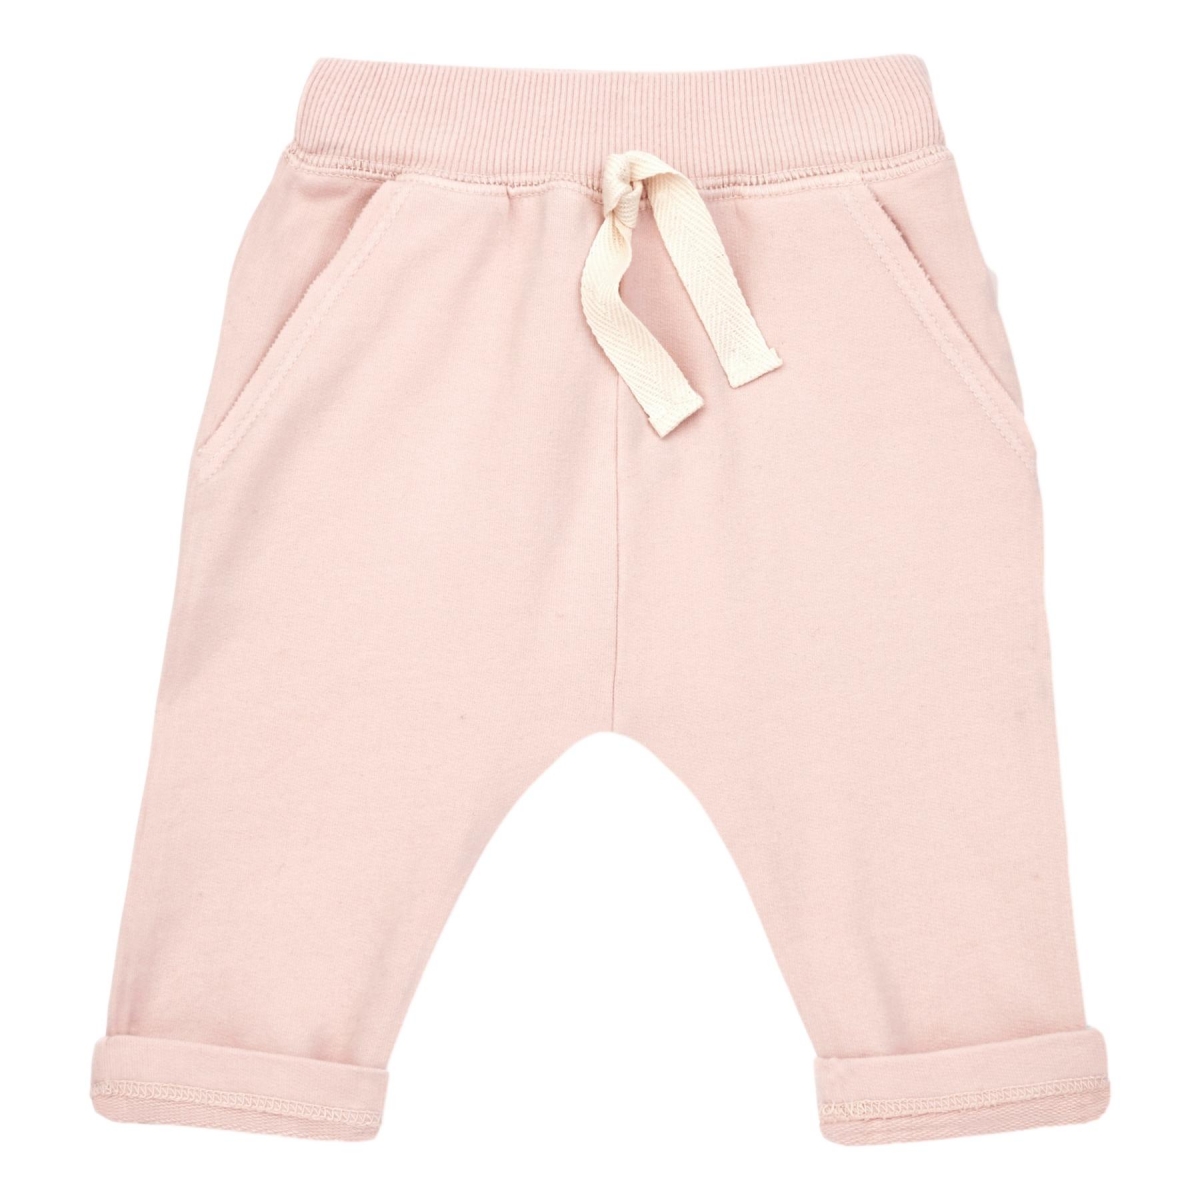 1 + in the family - Jofre Long Pants Rose - Leggings & pants - SS21-JOFRE-ROSE 